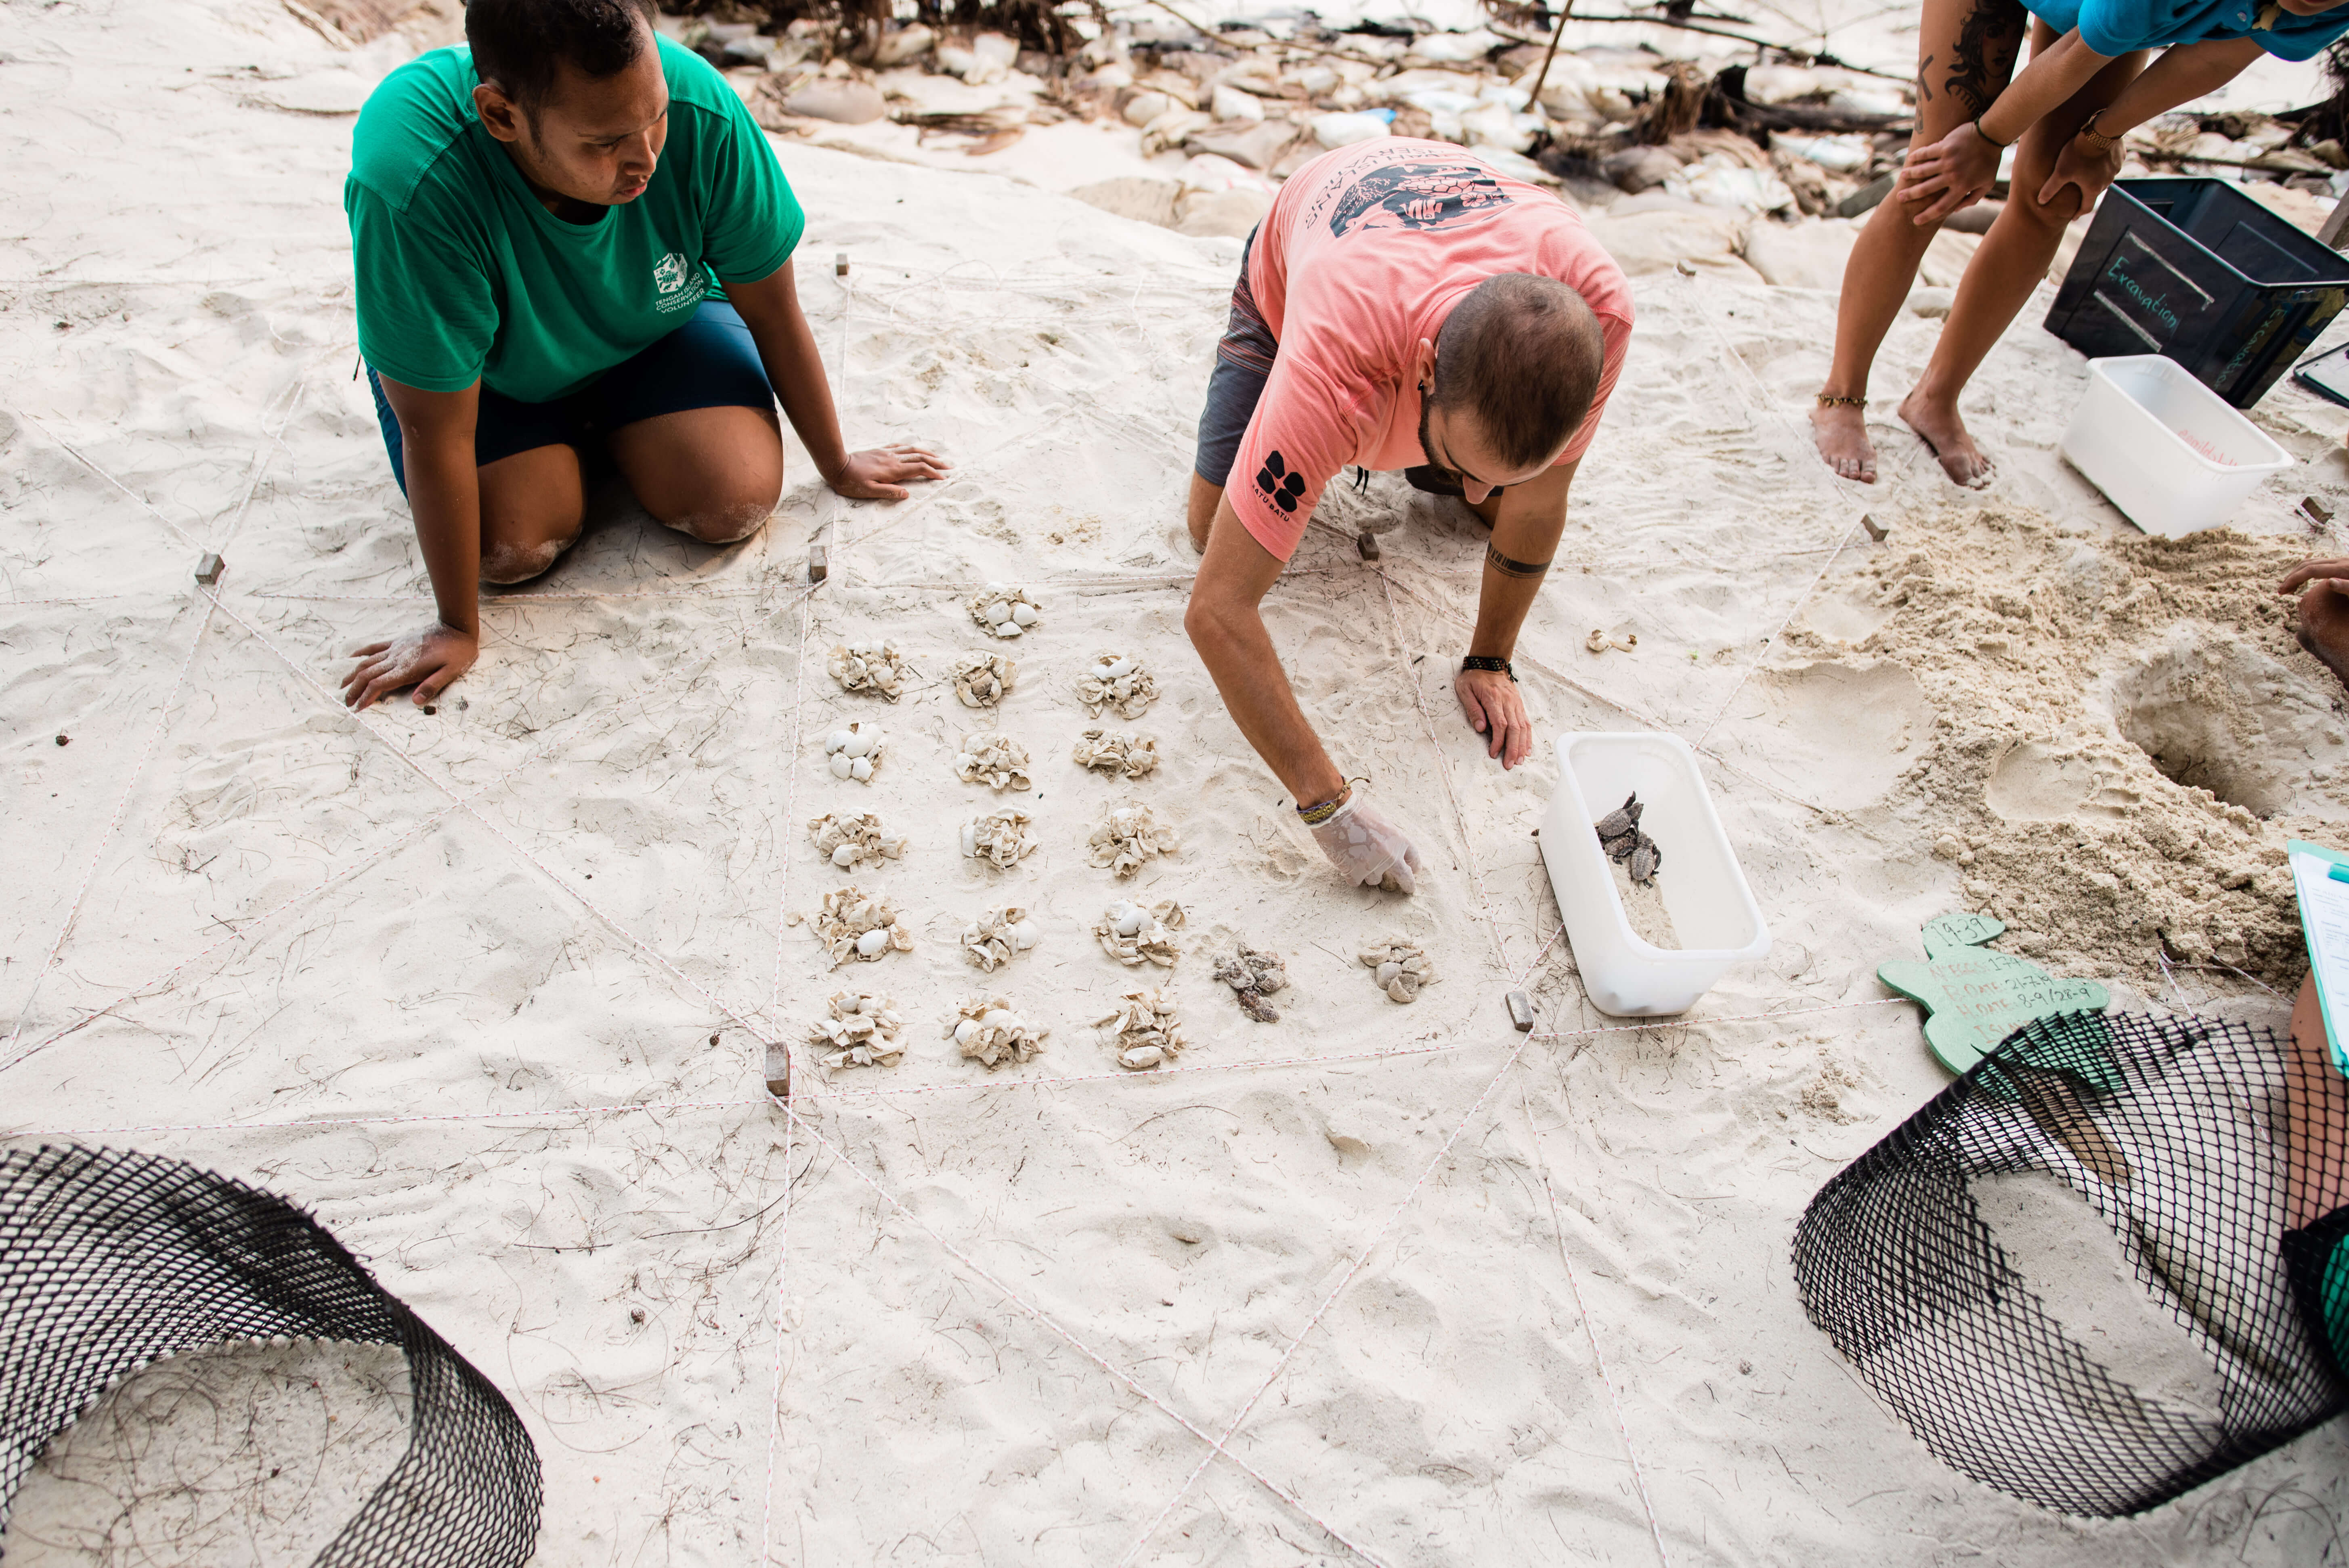 TIC conducts research on the surrounding marine environment, and initiates conservation projects. Pictured are staff and volunteers recording data about the latest batch of hatched turtle eggs. Photo by Kenny Ng